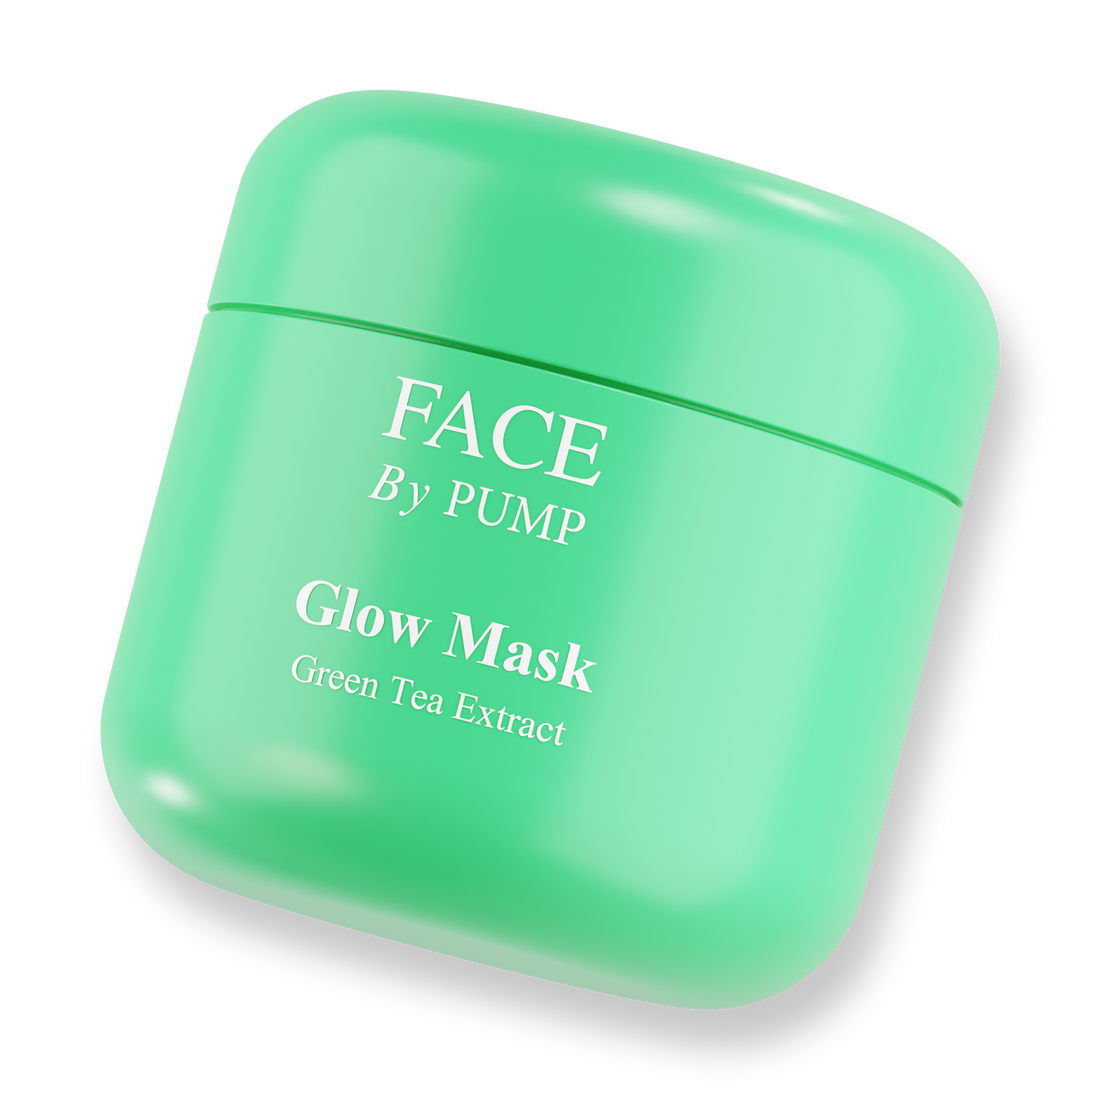 FACE By PUMP Glow Mask